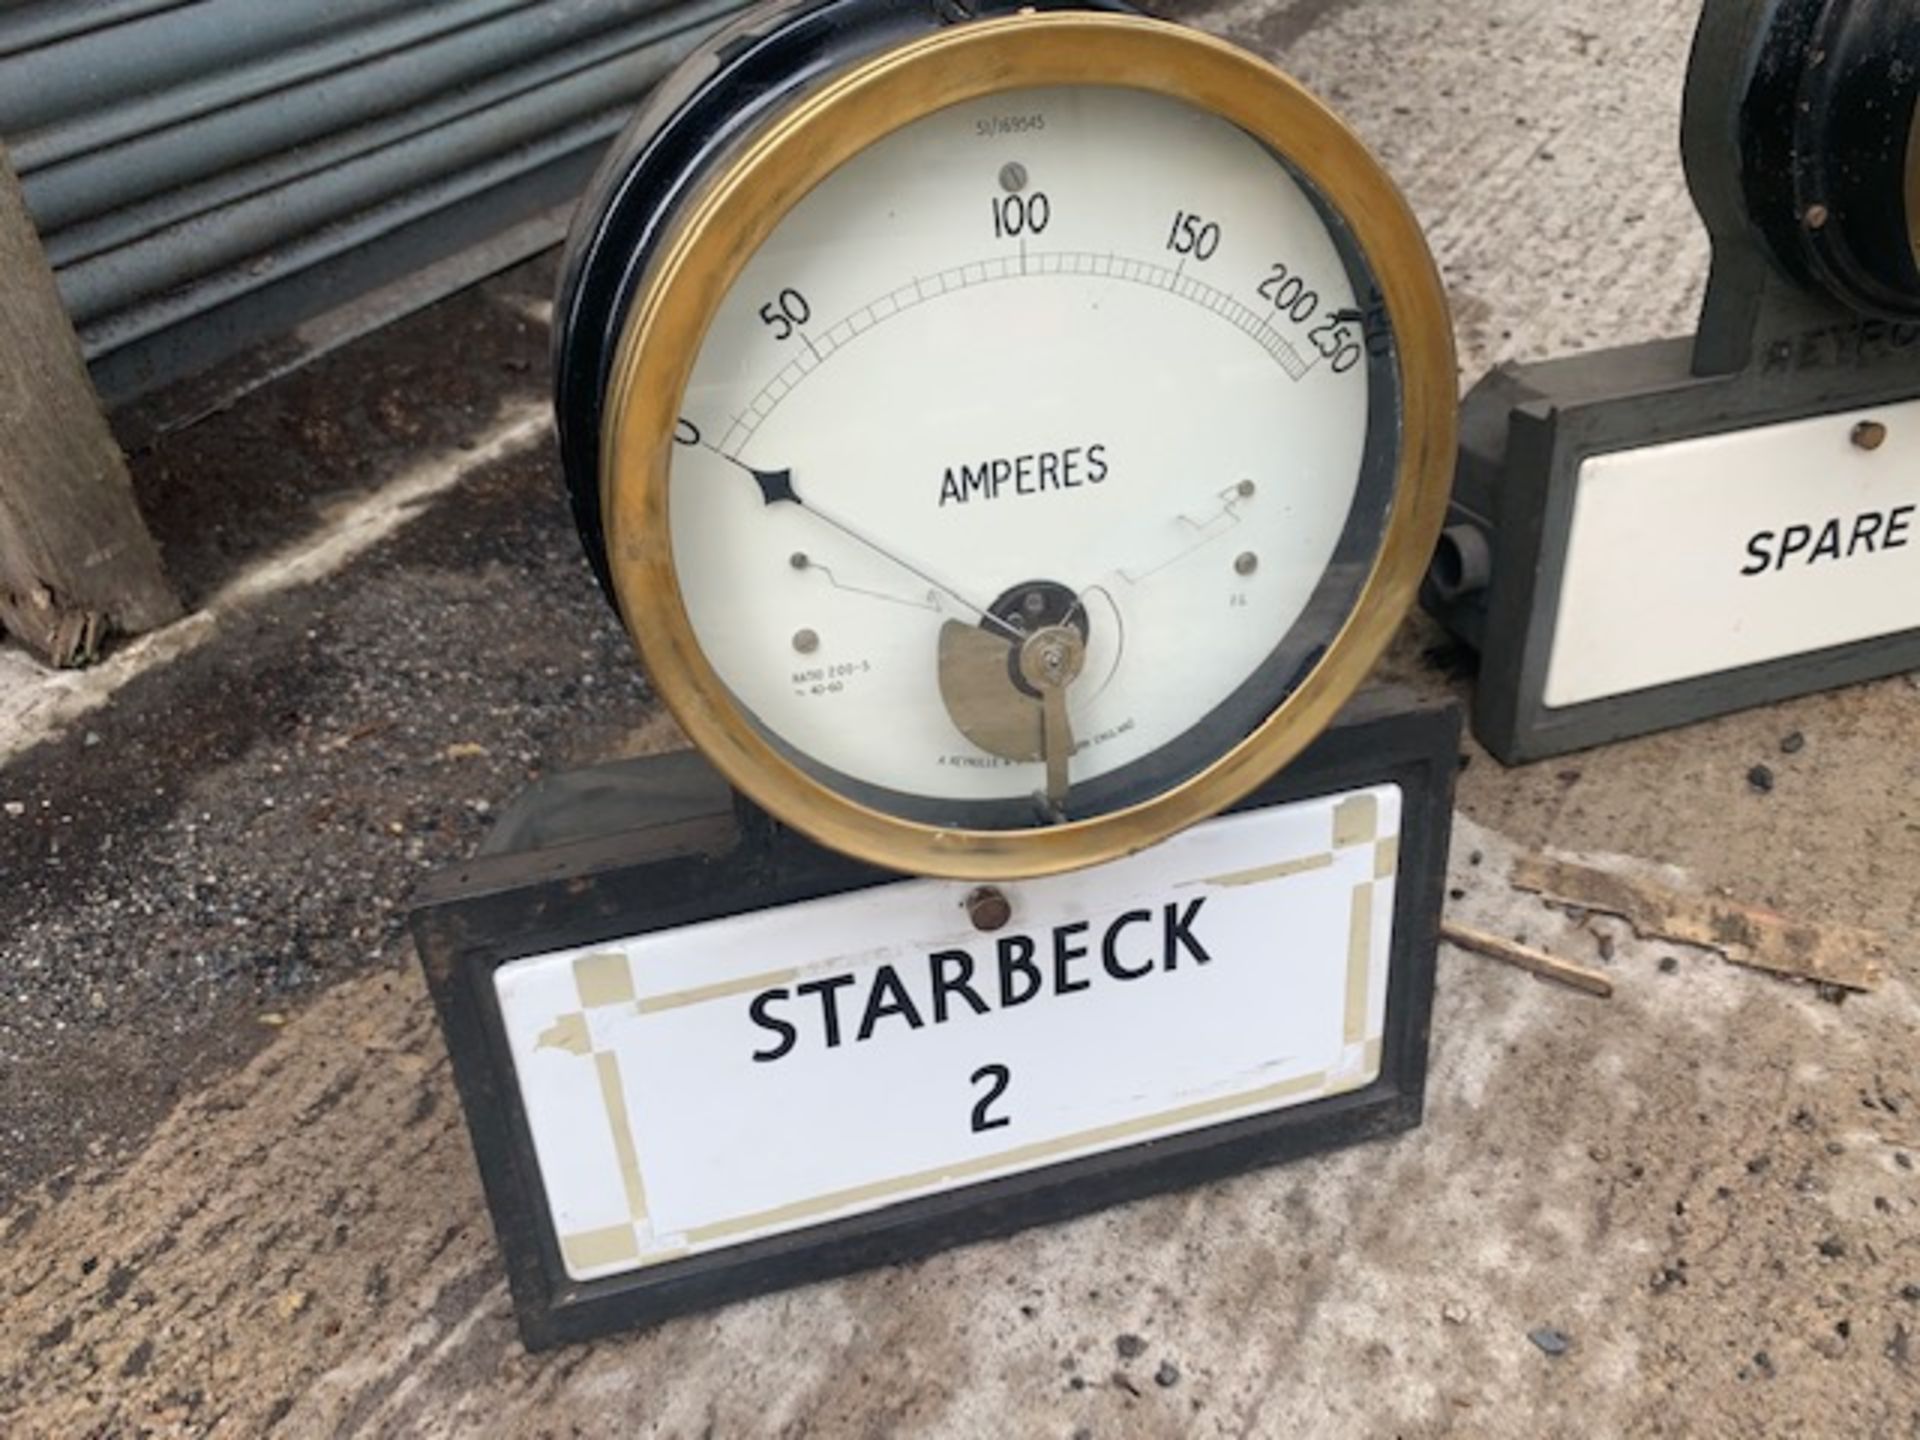 Vintage Revrone Cast Iron Power Station Starbeck 2 Meter With Enamel Box And Brass Gauge Meter